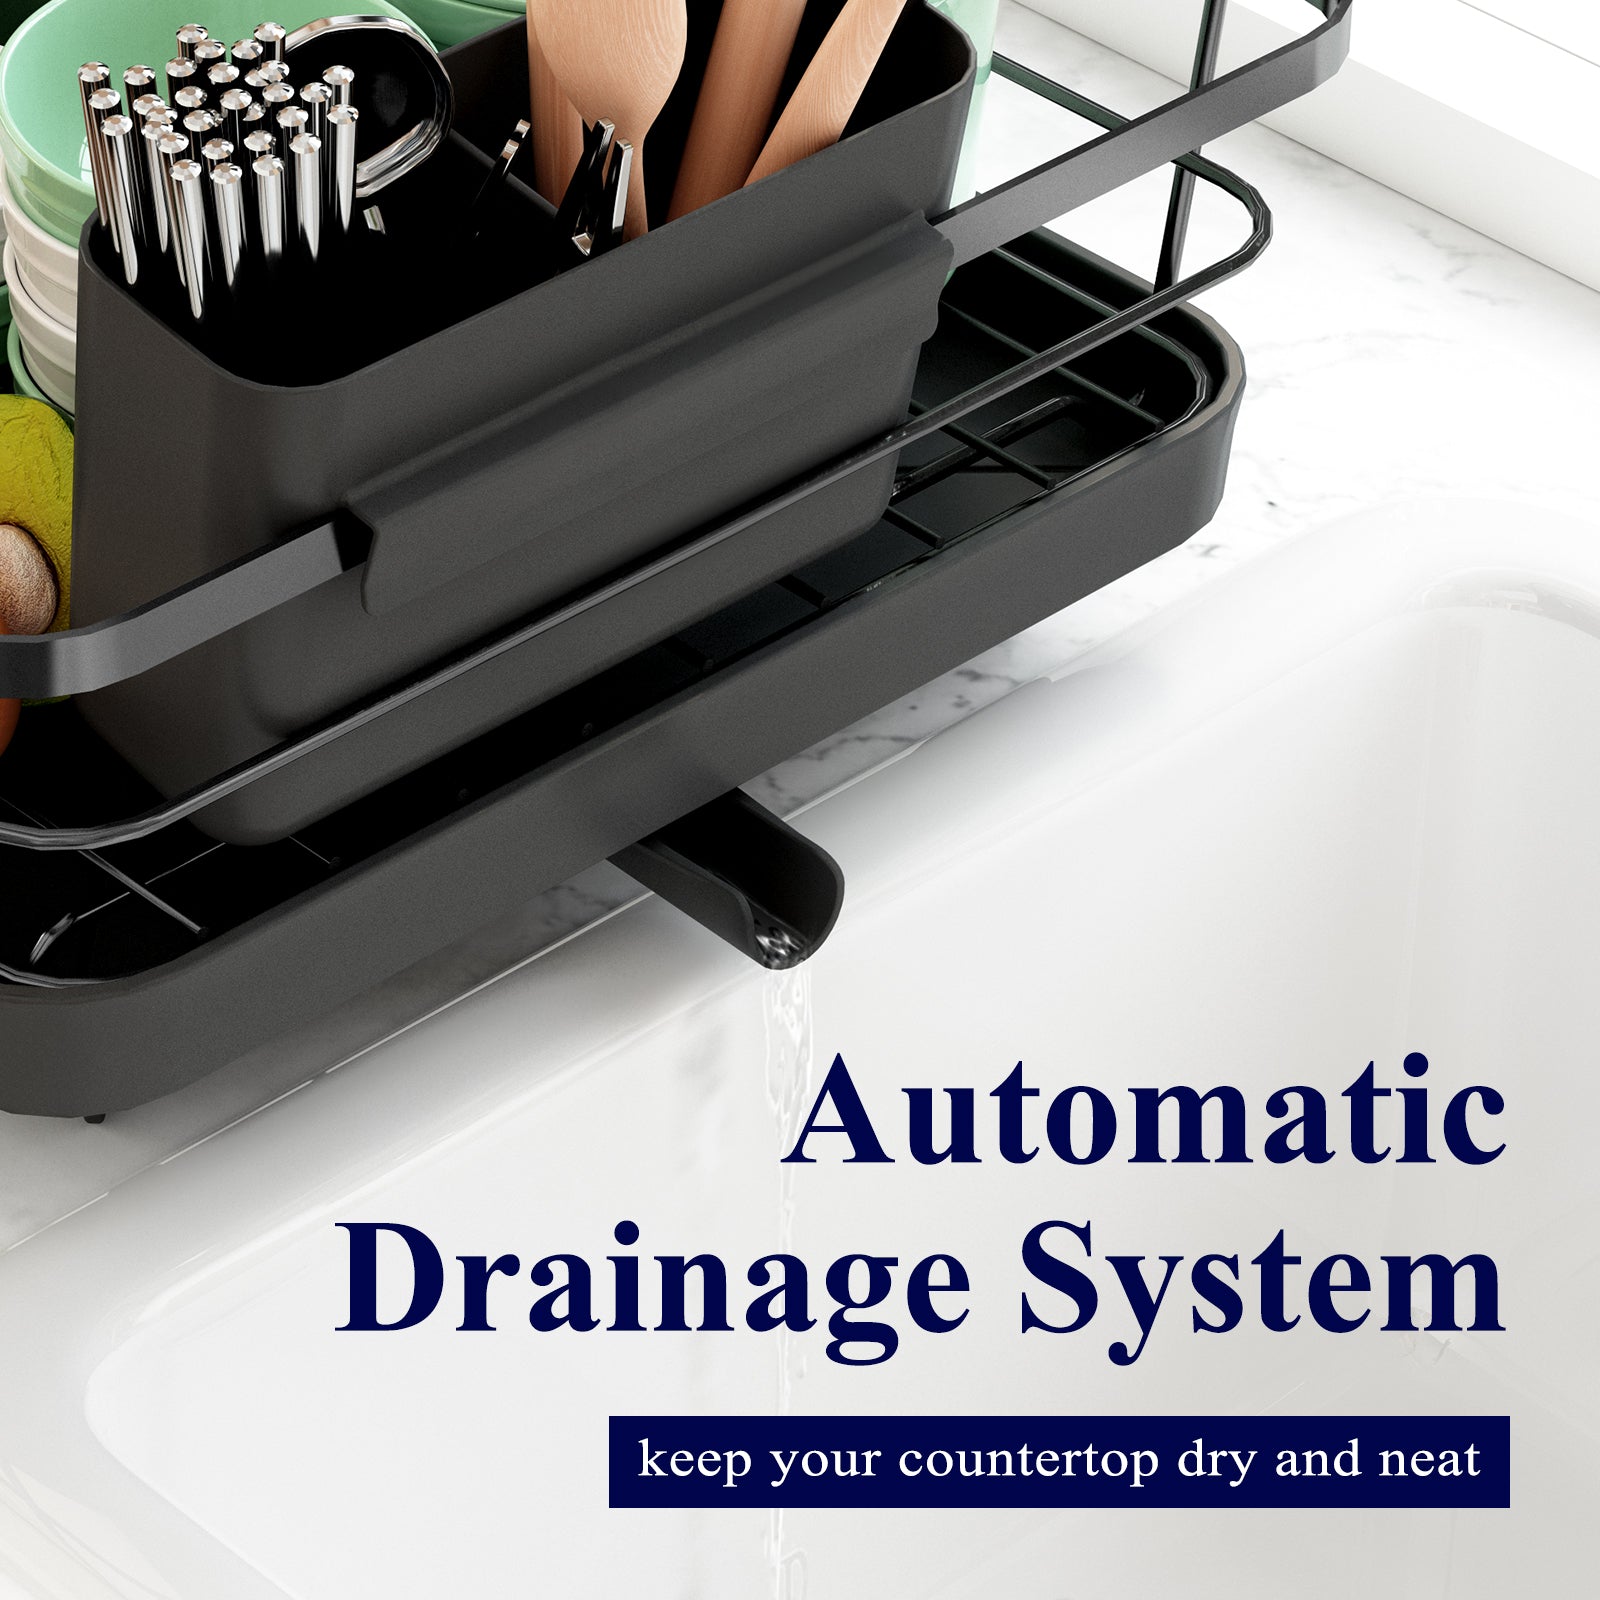 A Comprehensive Review of the Kitsure Dish Drying Rack 